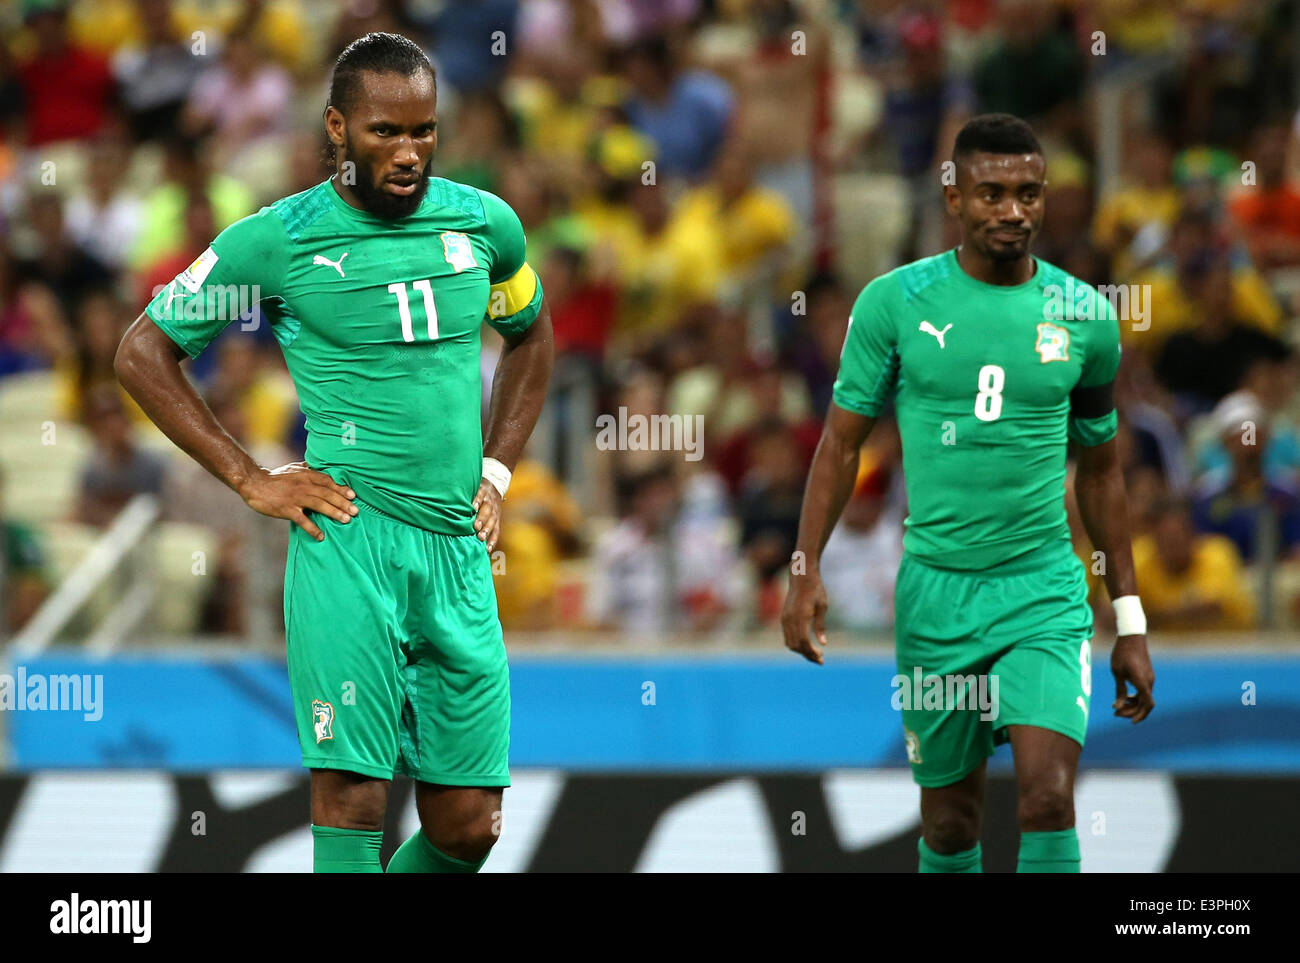 (140624) -- FORTALEZA, June 24, 2014 (Xinhua) -- Cote d'Ivoire's Didier Drogba (L) and Salomon Kalou react during a Group C match between Greece and Cote d'Ivoire of 2014 FIFA World Cup at the Estadio Castelao Stadium in Fortaleza, Brazil, June 24, 2014. Greece won 2-1 over Cote d'Ivoire on Tuesday. (Xinhua/Cao Can)(xzj) Stock Photo